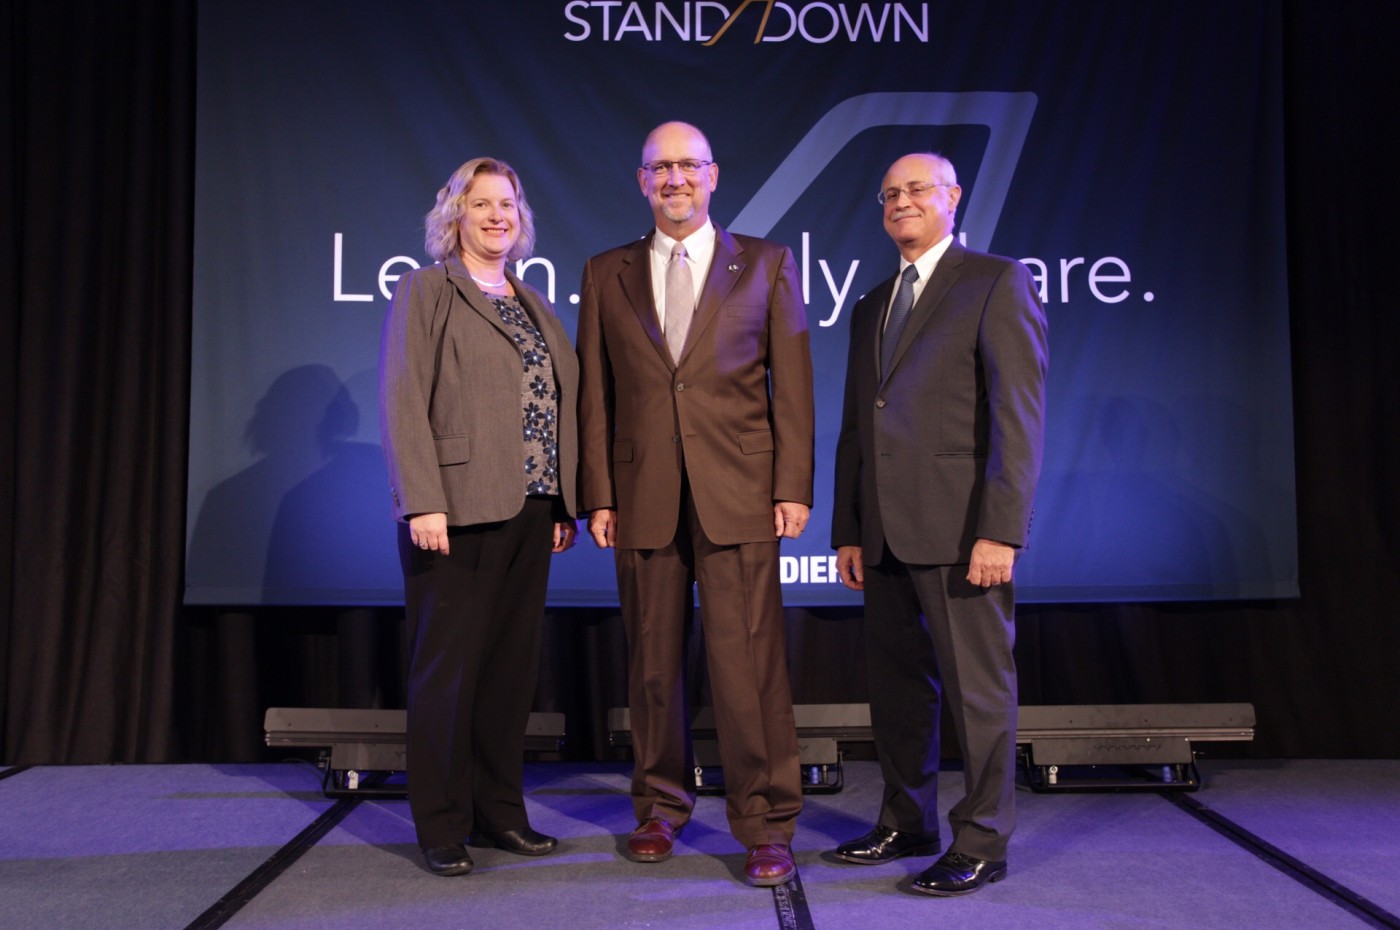 Safety Standdown | Jeff Longwell